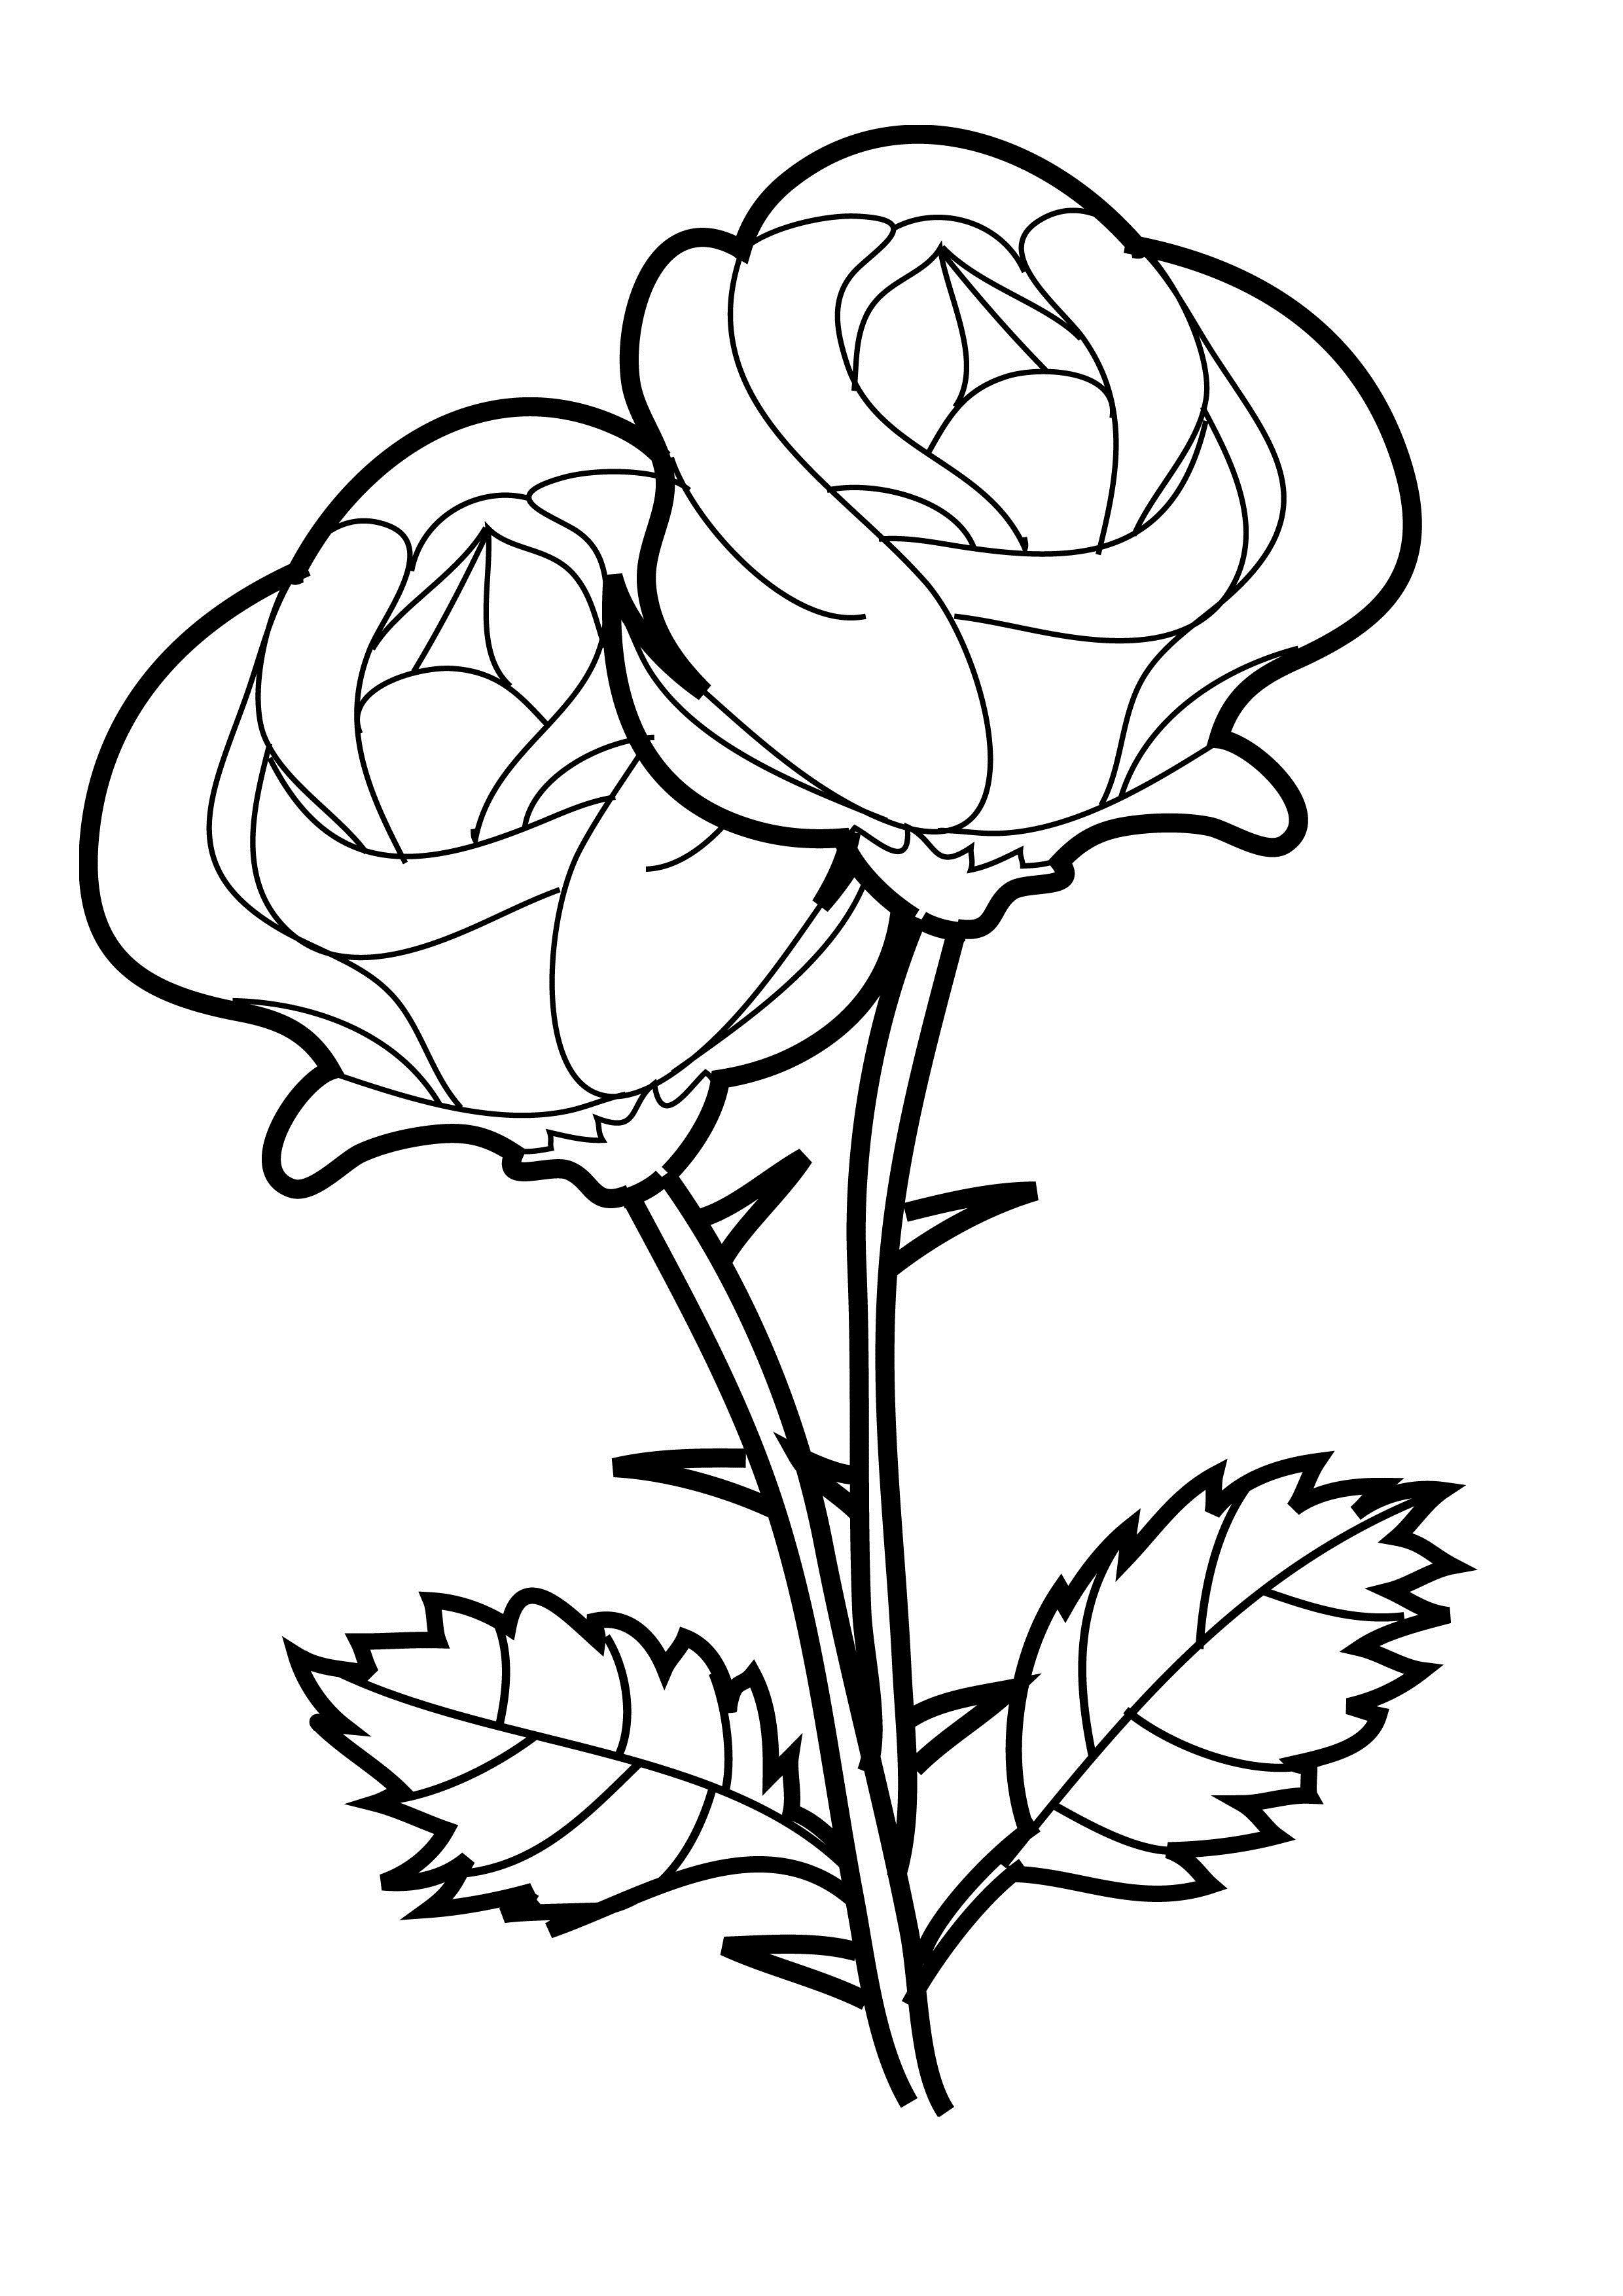 the-20-best-ideas-for-coloring-pages-for-adults-roses-best